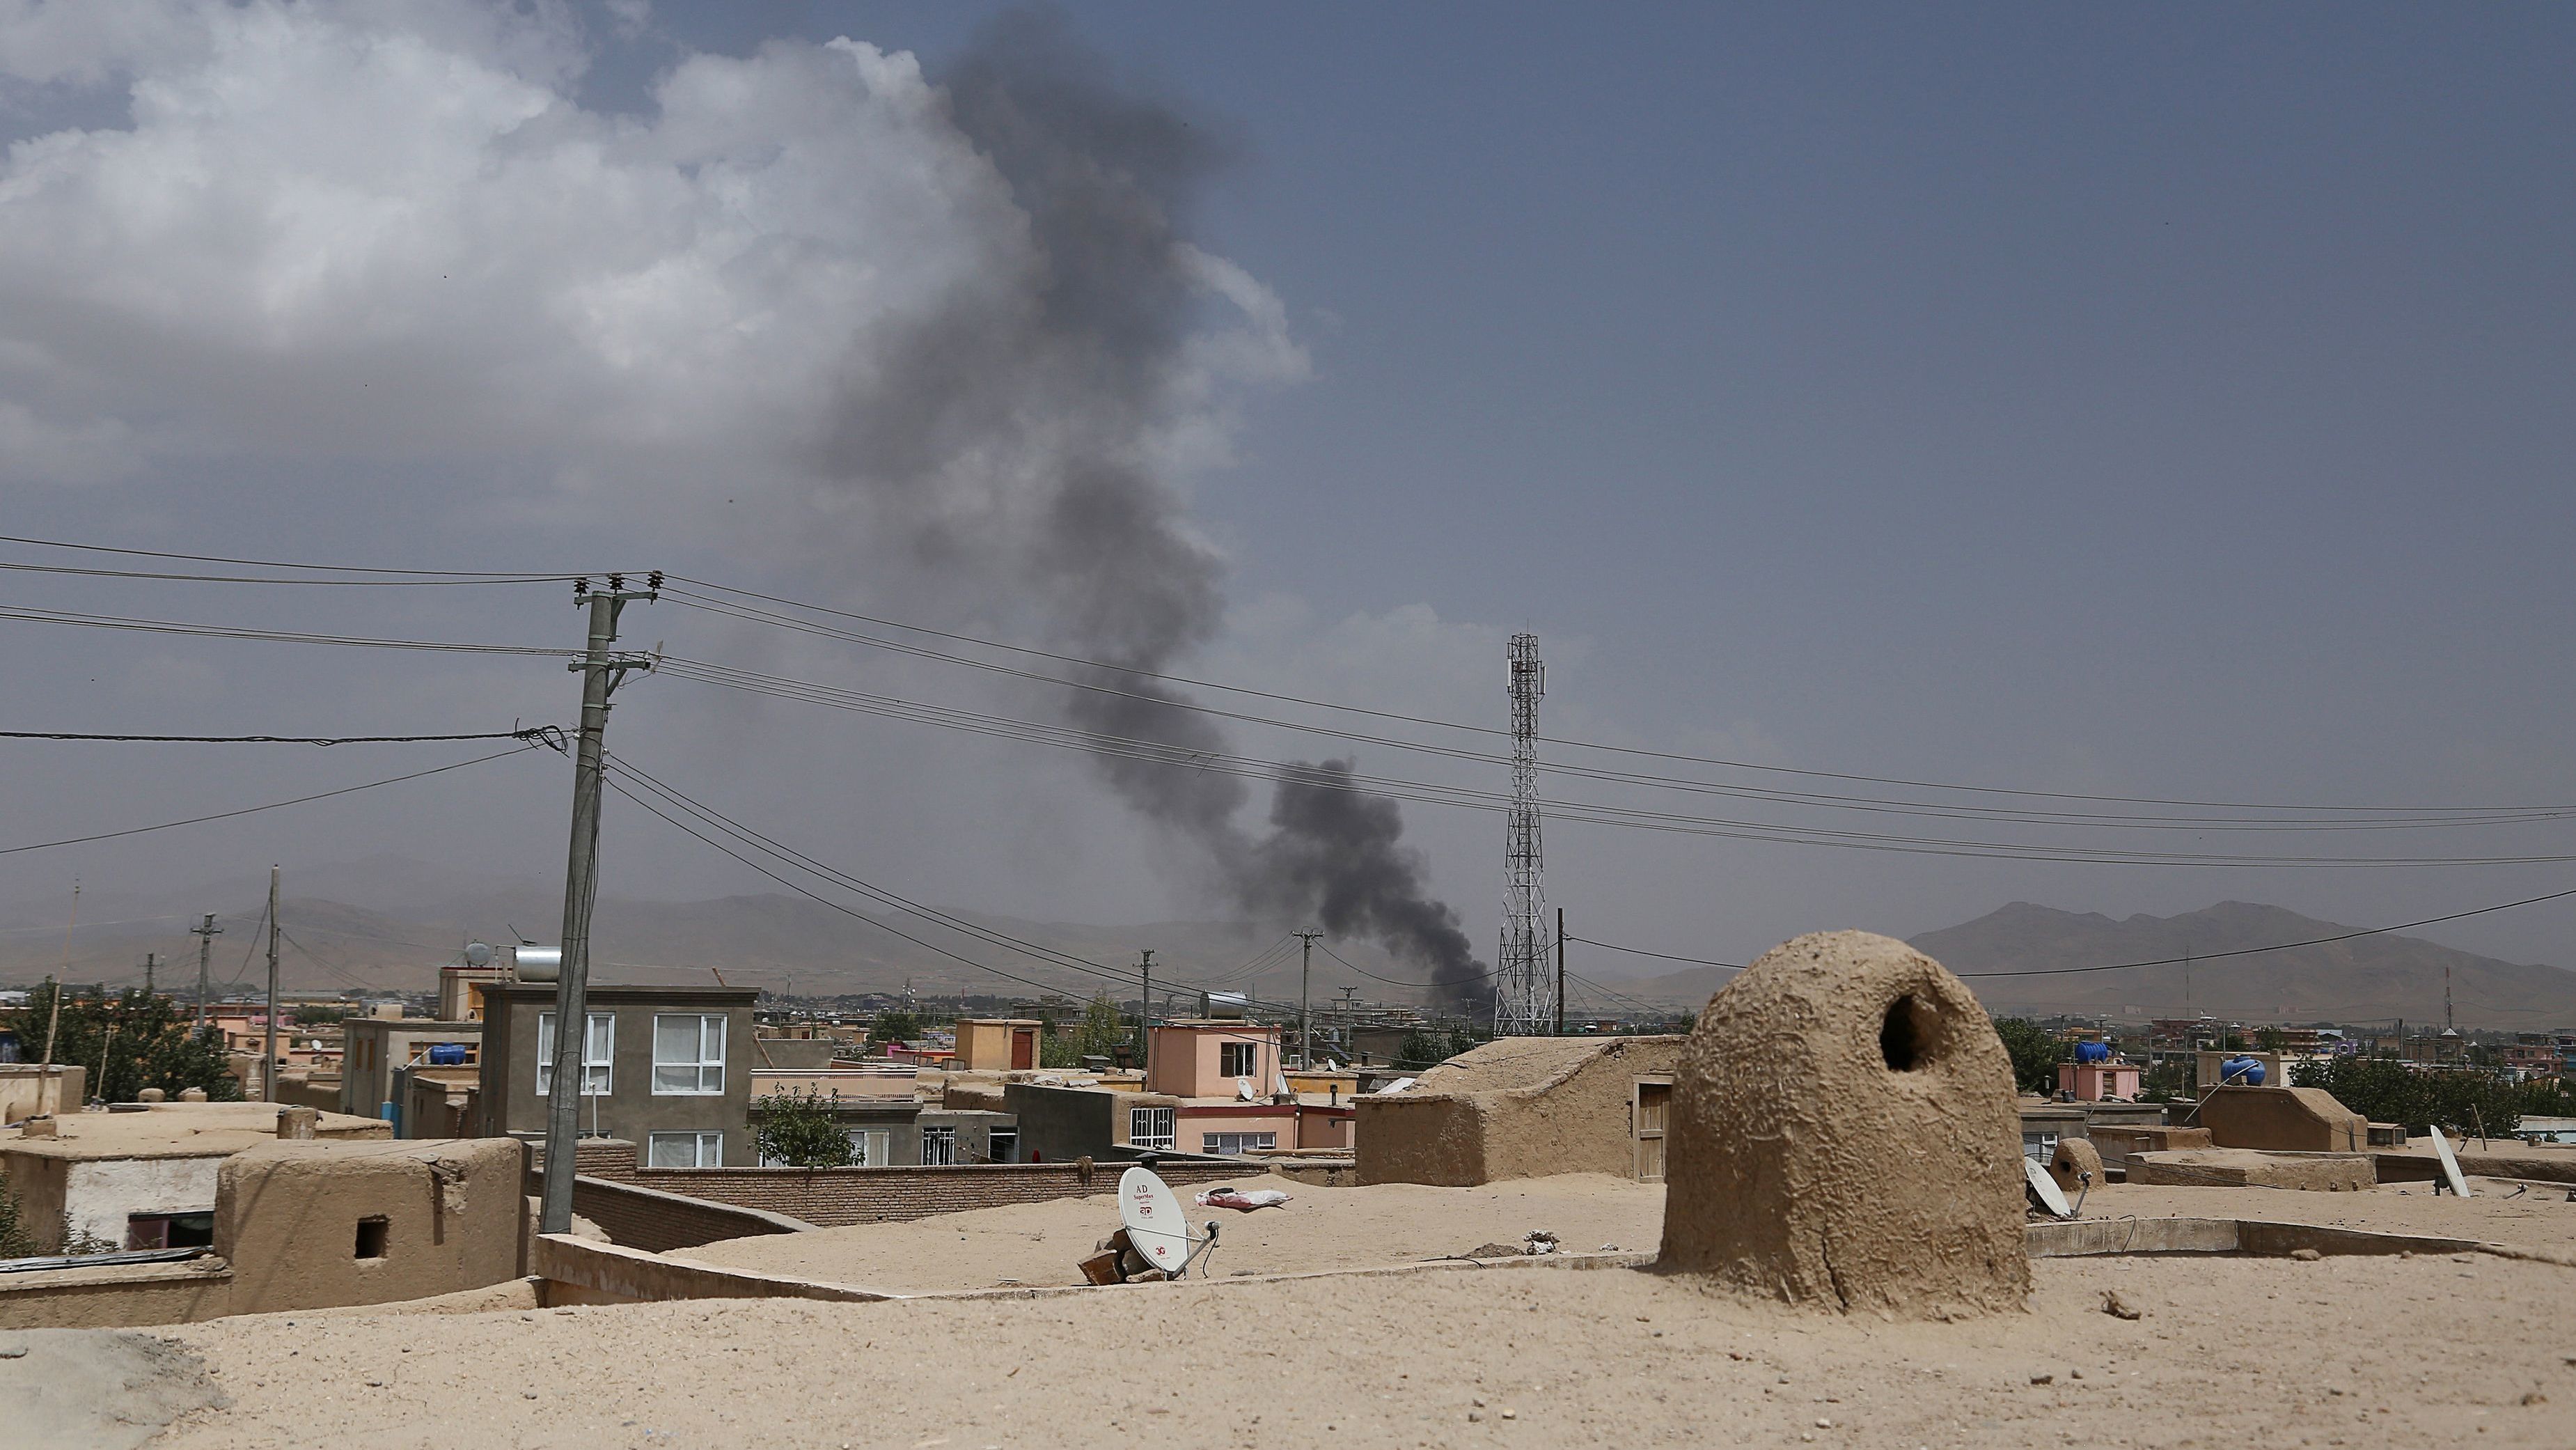 Smoke is seen rising into the air after Taliban militants launched an attack on the Afghan provincial capital of Ghazni on Friday.